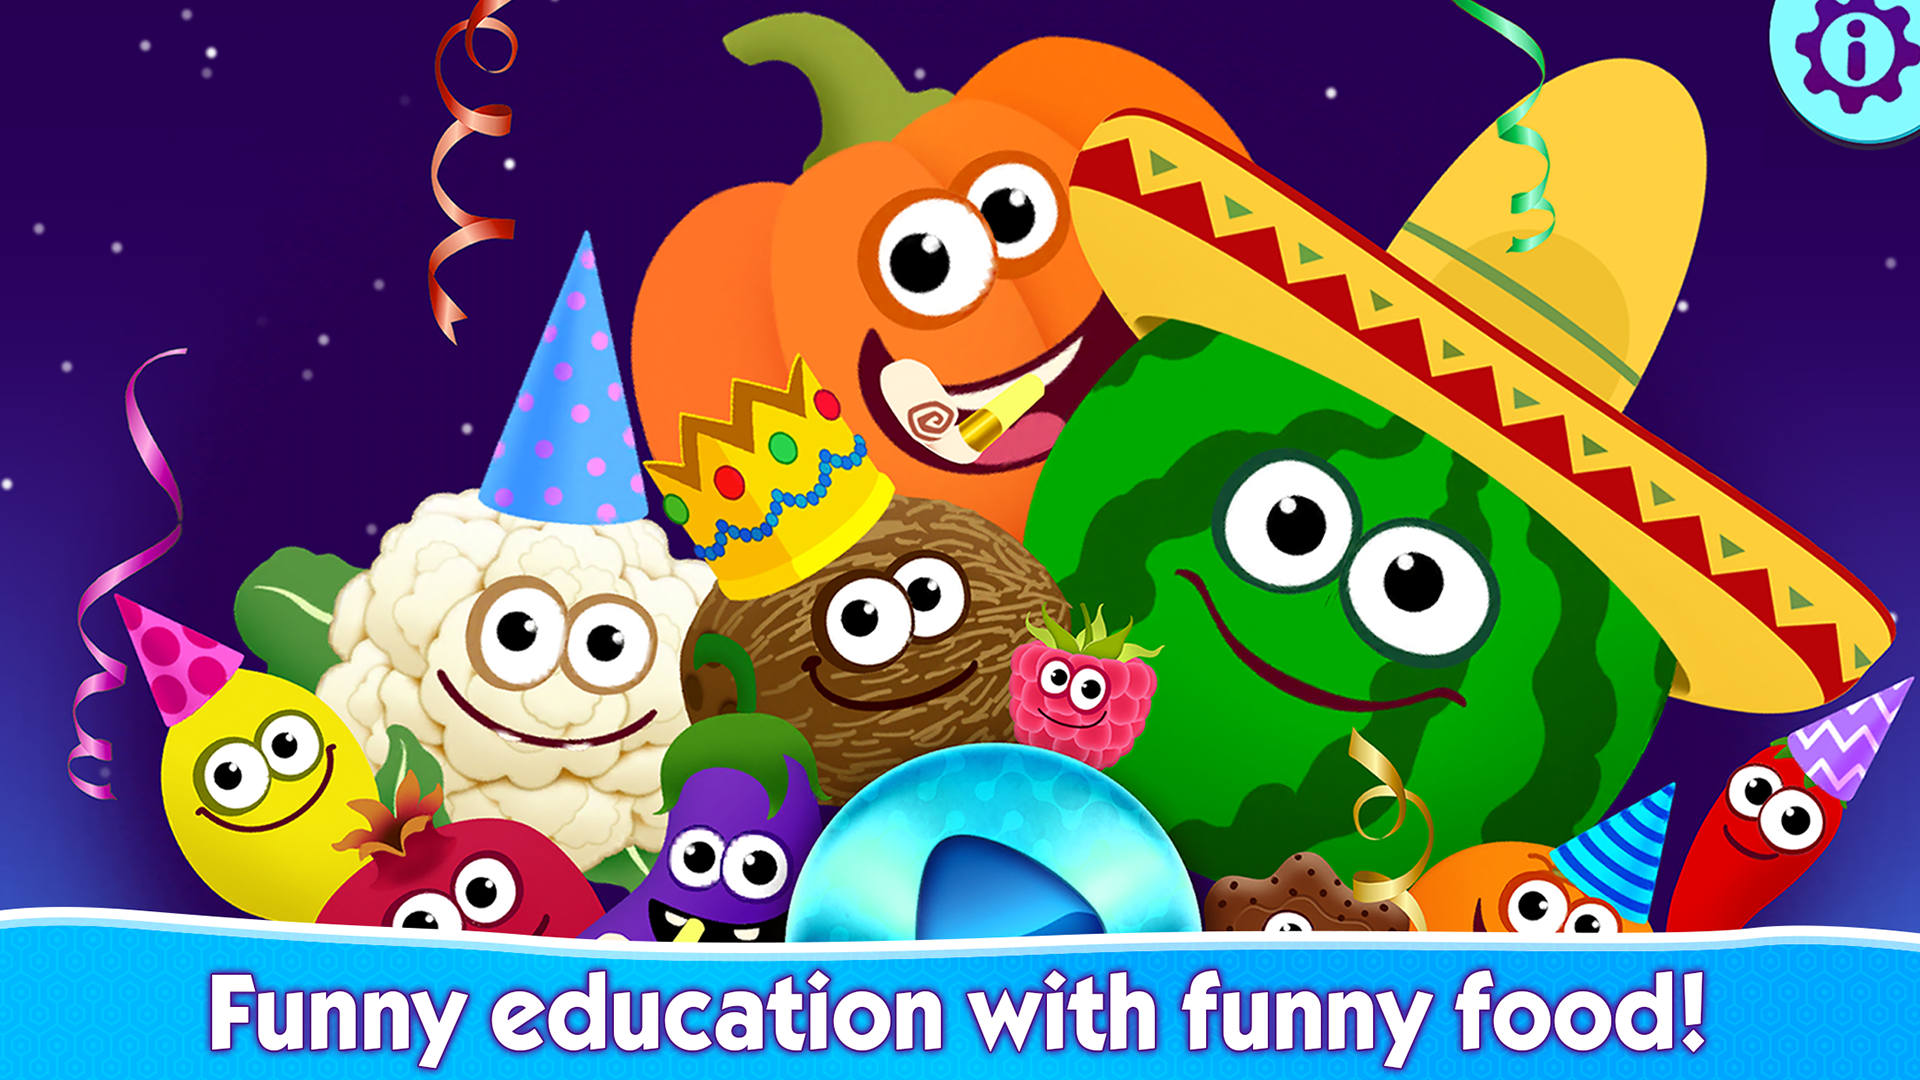 Funny Food 2 - Educational Games for Kids Toddlers in Learning Apps 4 Babies & Preschoolers! Kindergarten Game for Girls Boys 3 5 Years Old: Children Learn Smart Baby Shapes and Colors! Puzzle matching free develop fine motor skills, attention, logic